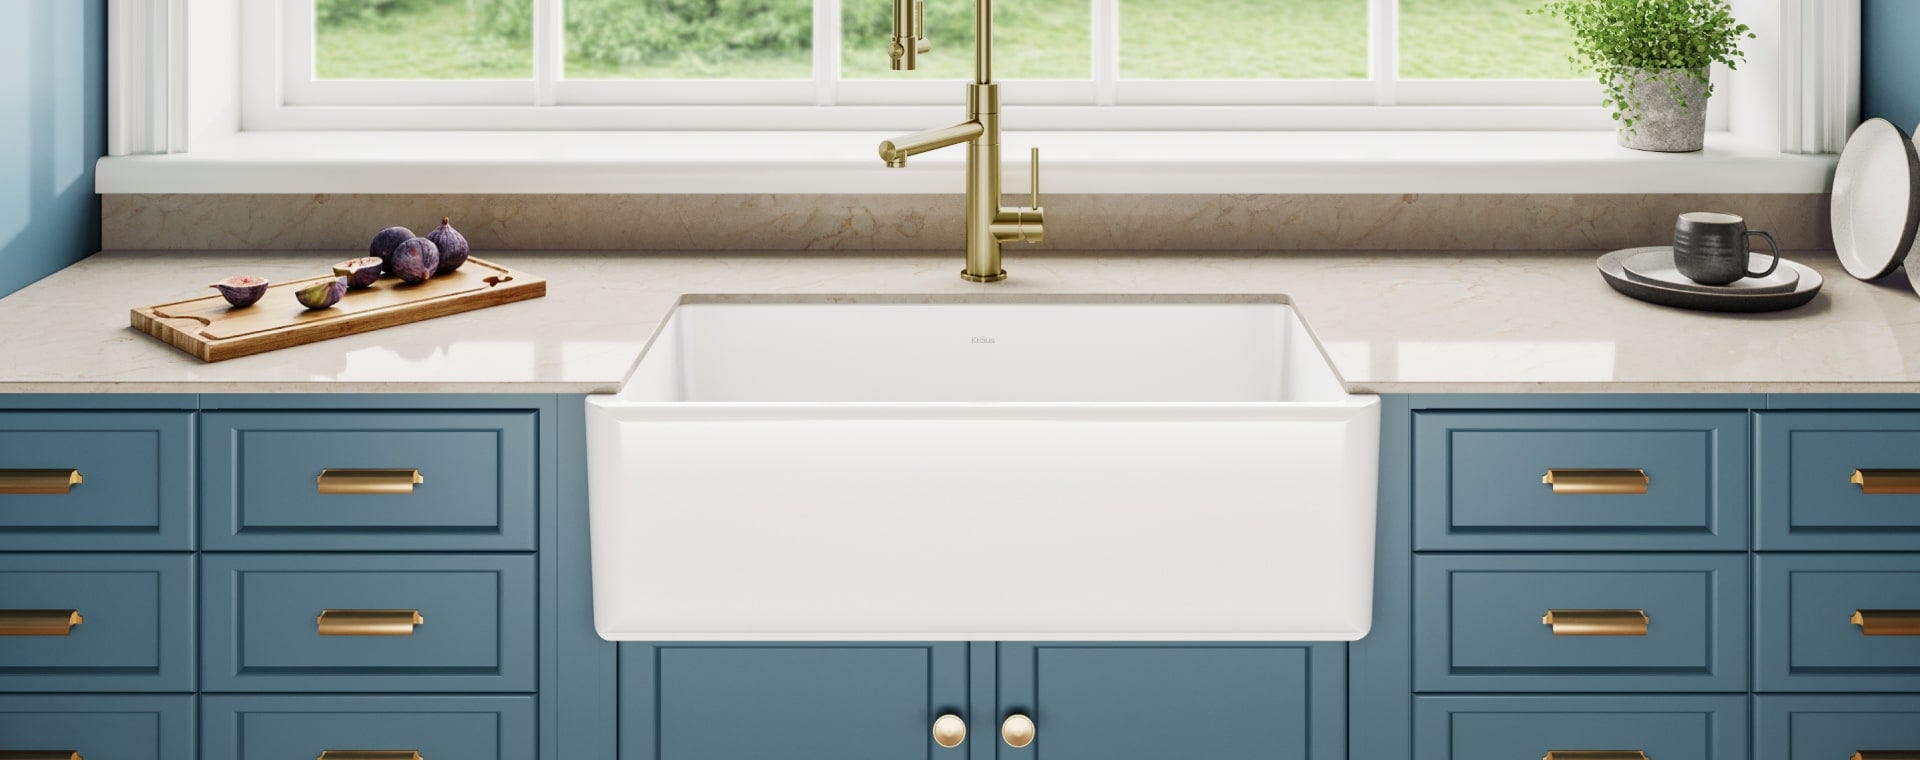 What You Need to Know About Apron Front Sinks